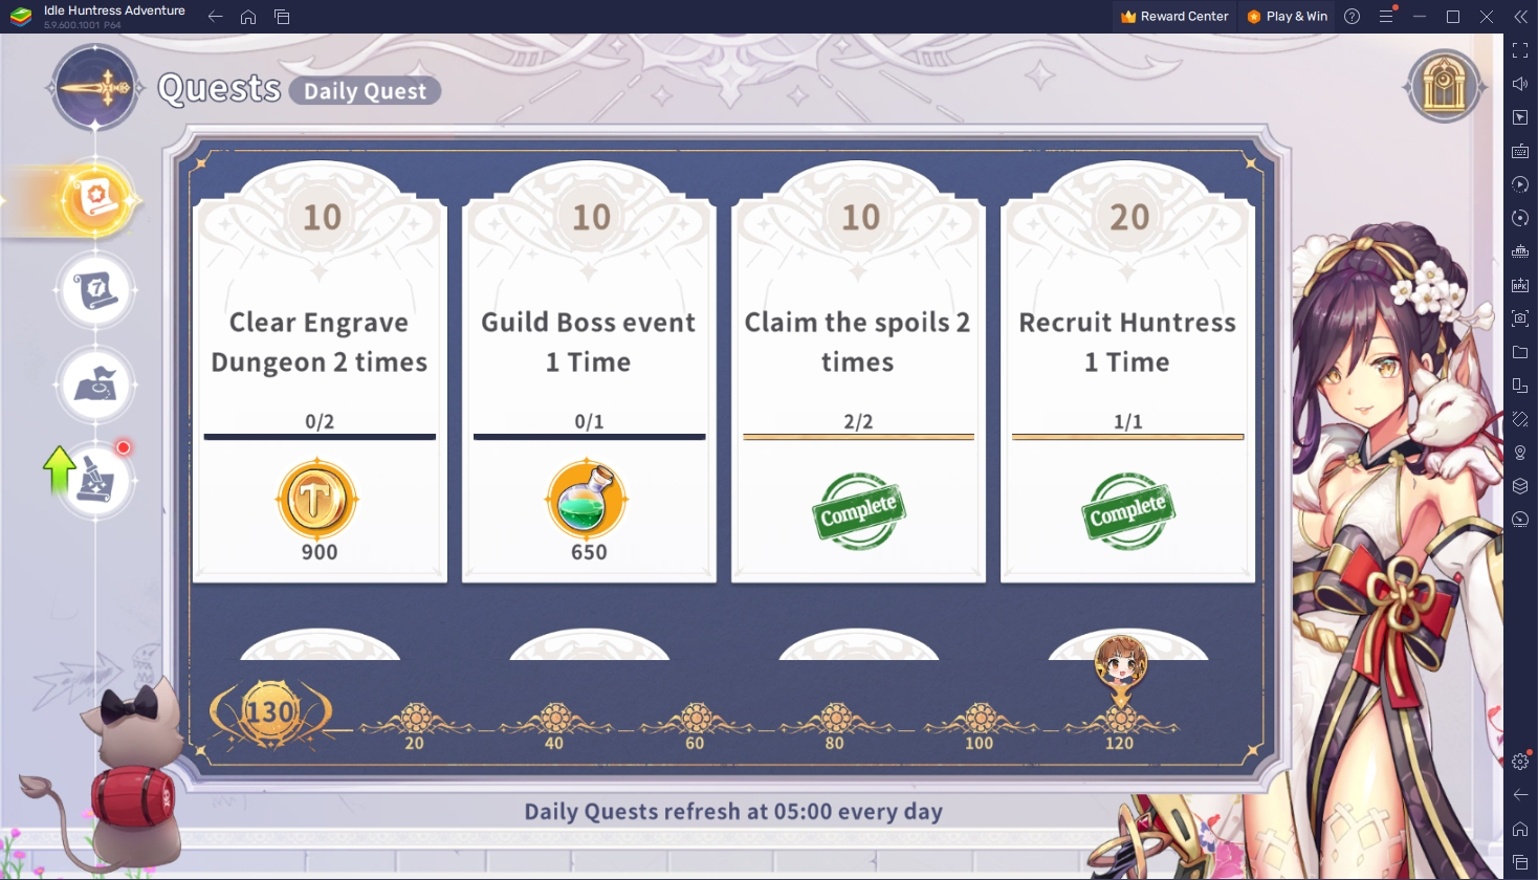 BlueStacks' Beginners Guide to Playing Idle Huntress: Adventure